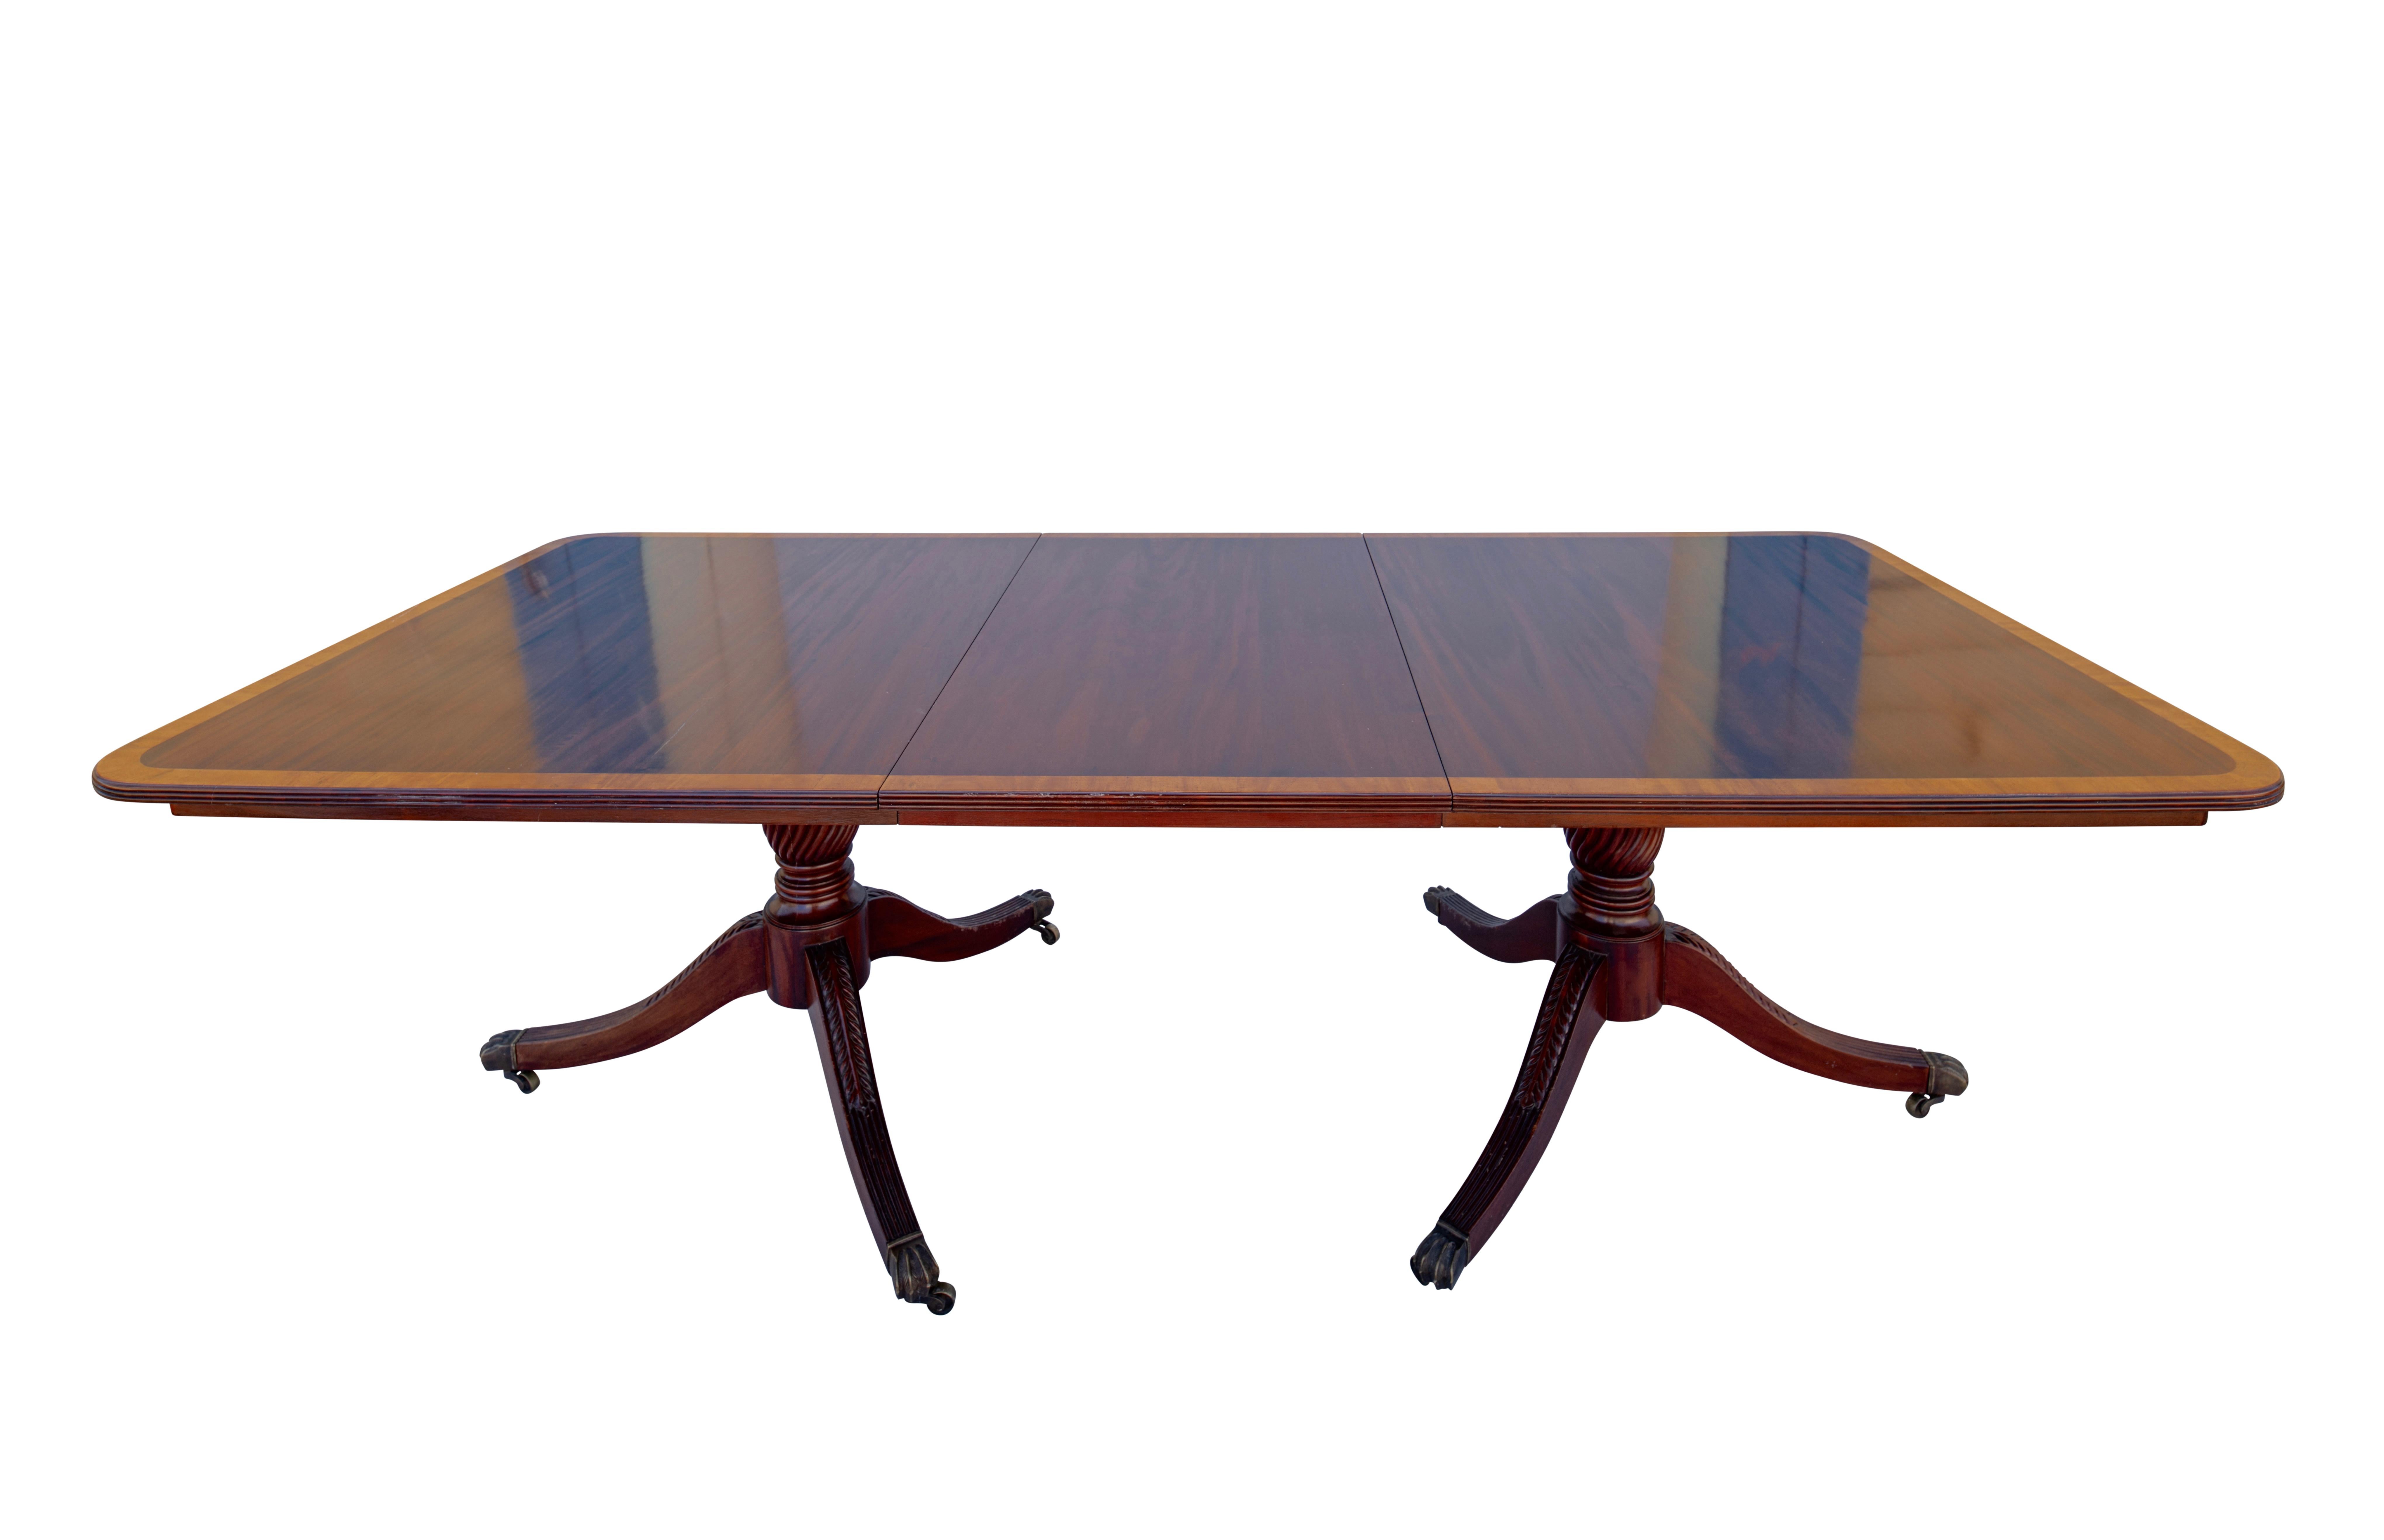 A large and unusually wide mahogany double pedestal dining table with satinwood inlay trim. The table has two leaves measuring 24 inches each. In excellent condition, professionally restored and refinished sometime in the 1970s.
England, early 19th